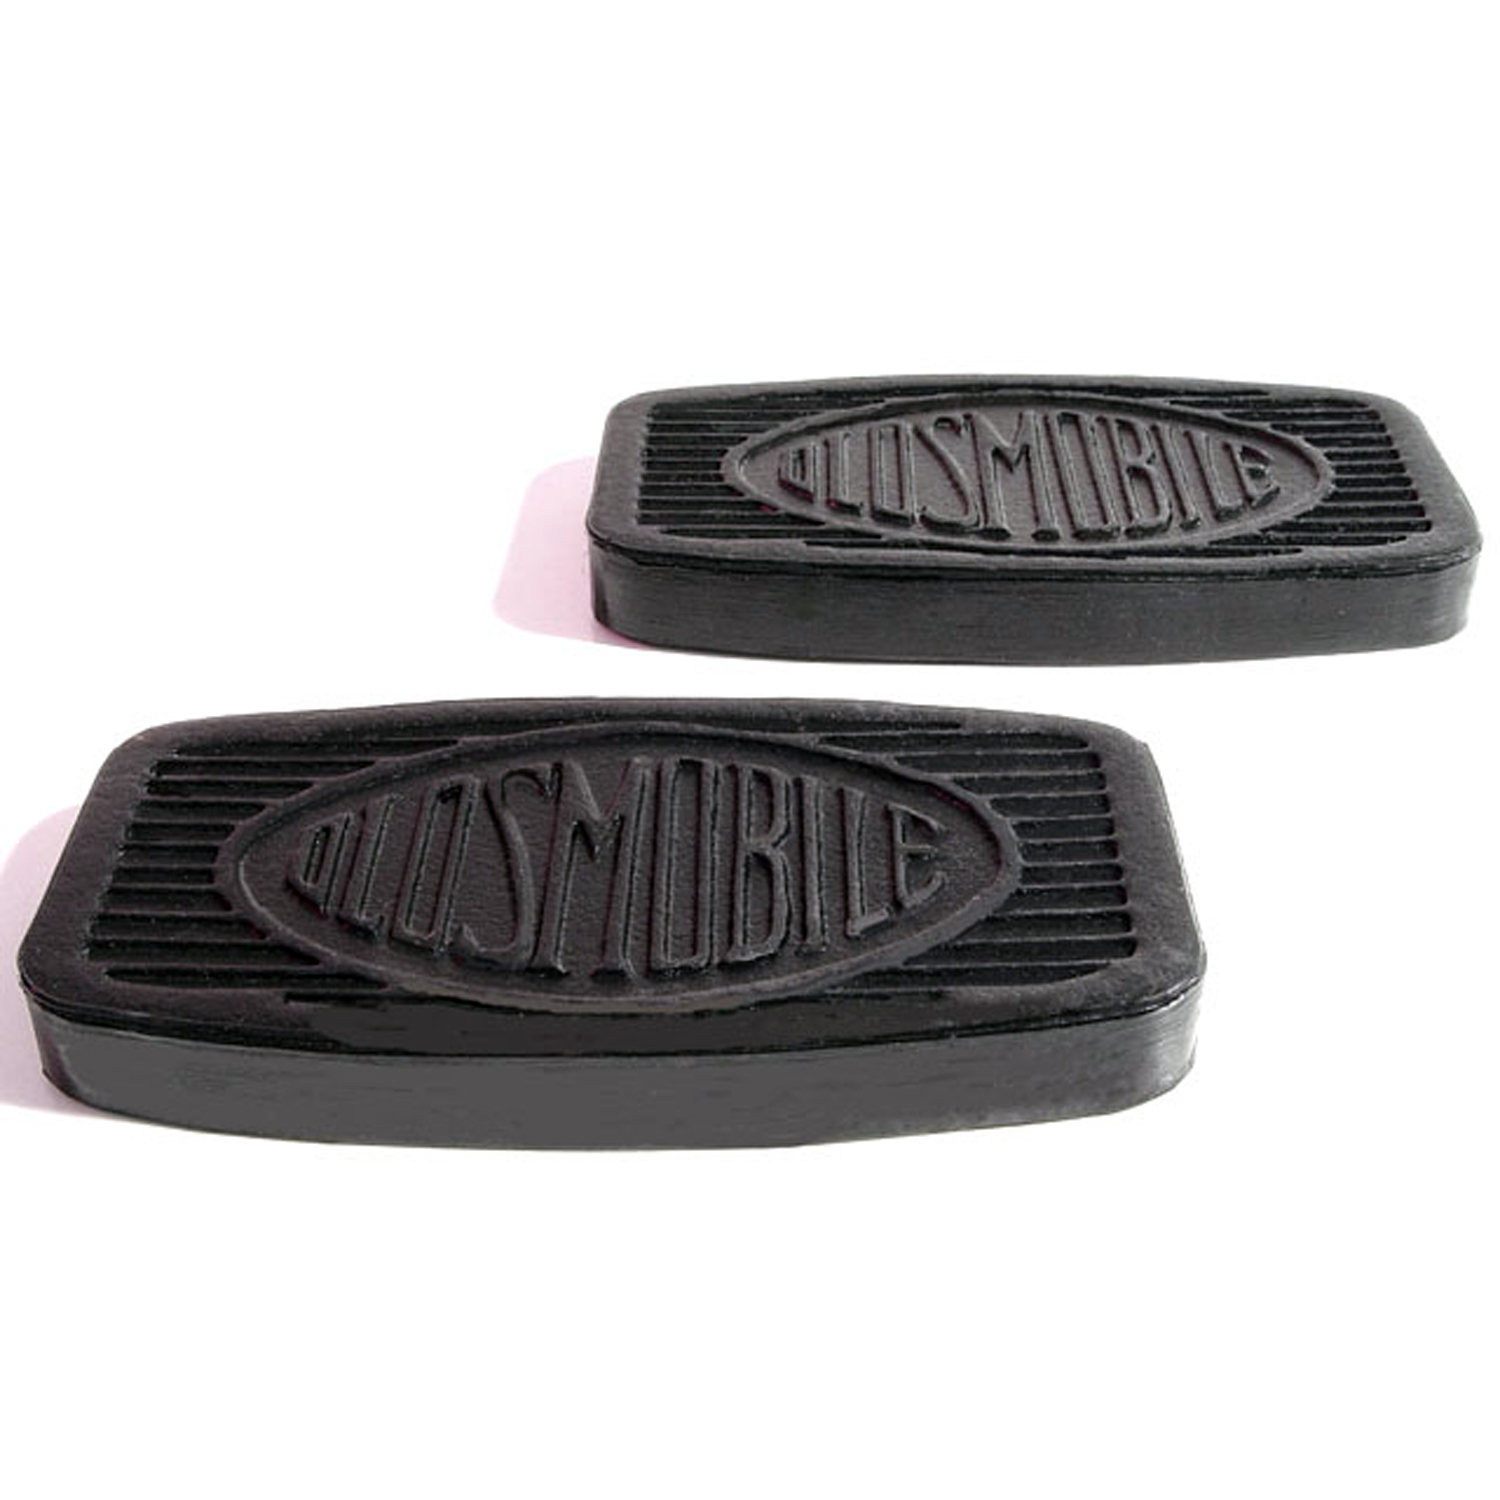 1933 Oldsmobile Model F-33 Clutch and Brake Pedal Pads.  3-1/2 wide X 1-3/16 long-CB 95